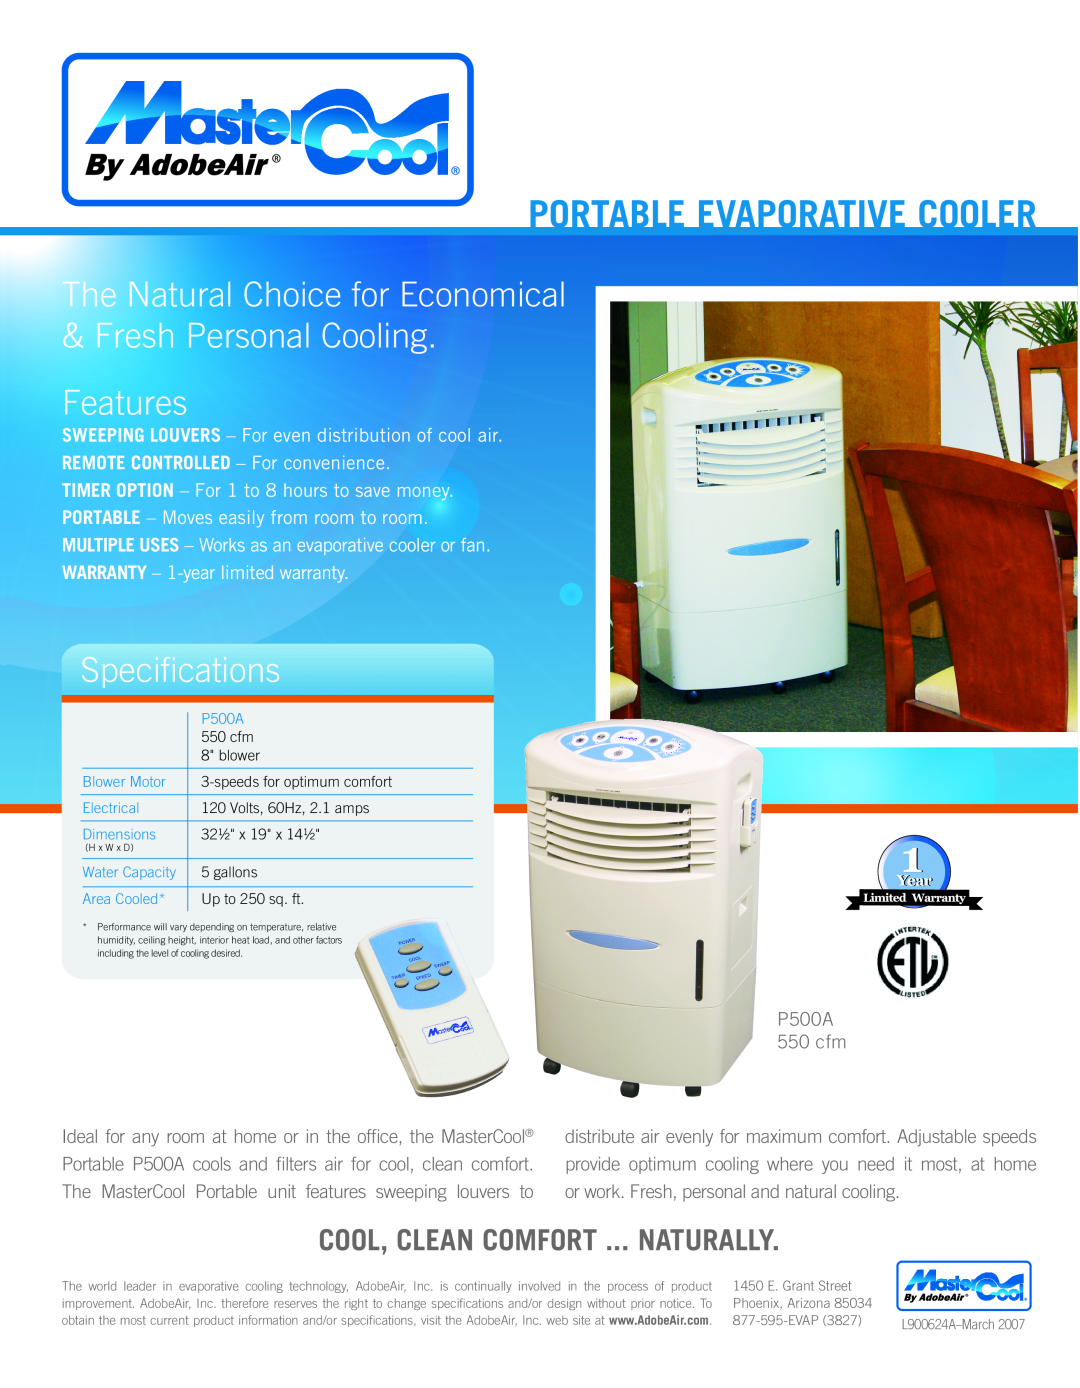 AdobeAir P500A specifications Portable Evaporative Cooler, Features, Specifications, Cool, Clean Comfort ... Naturally 